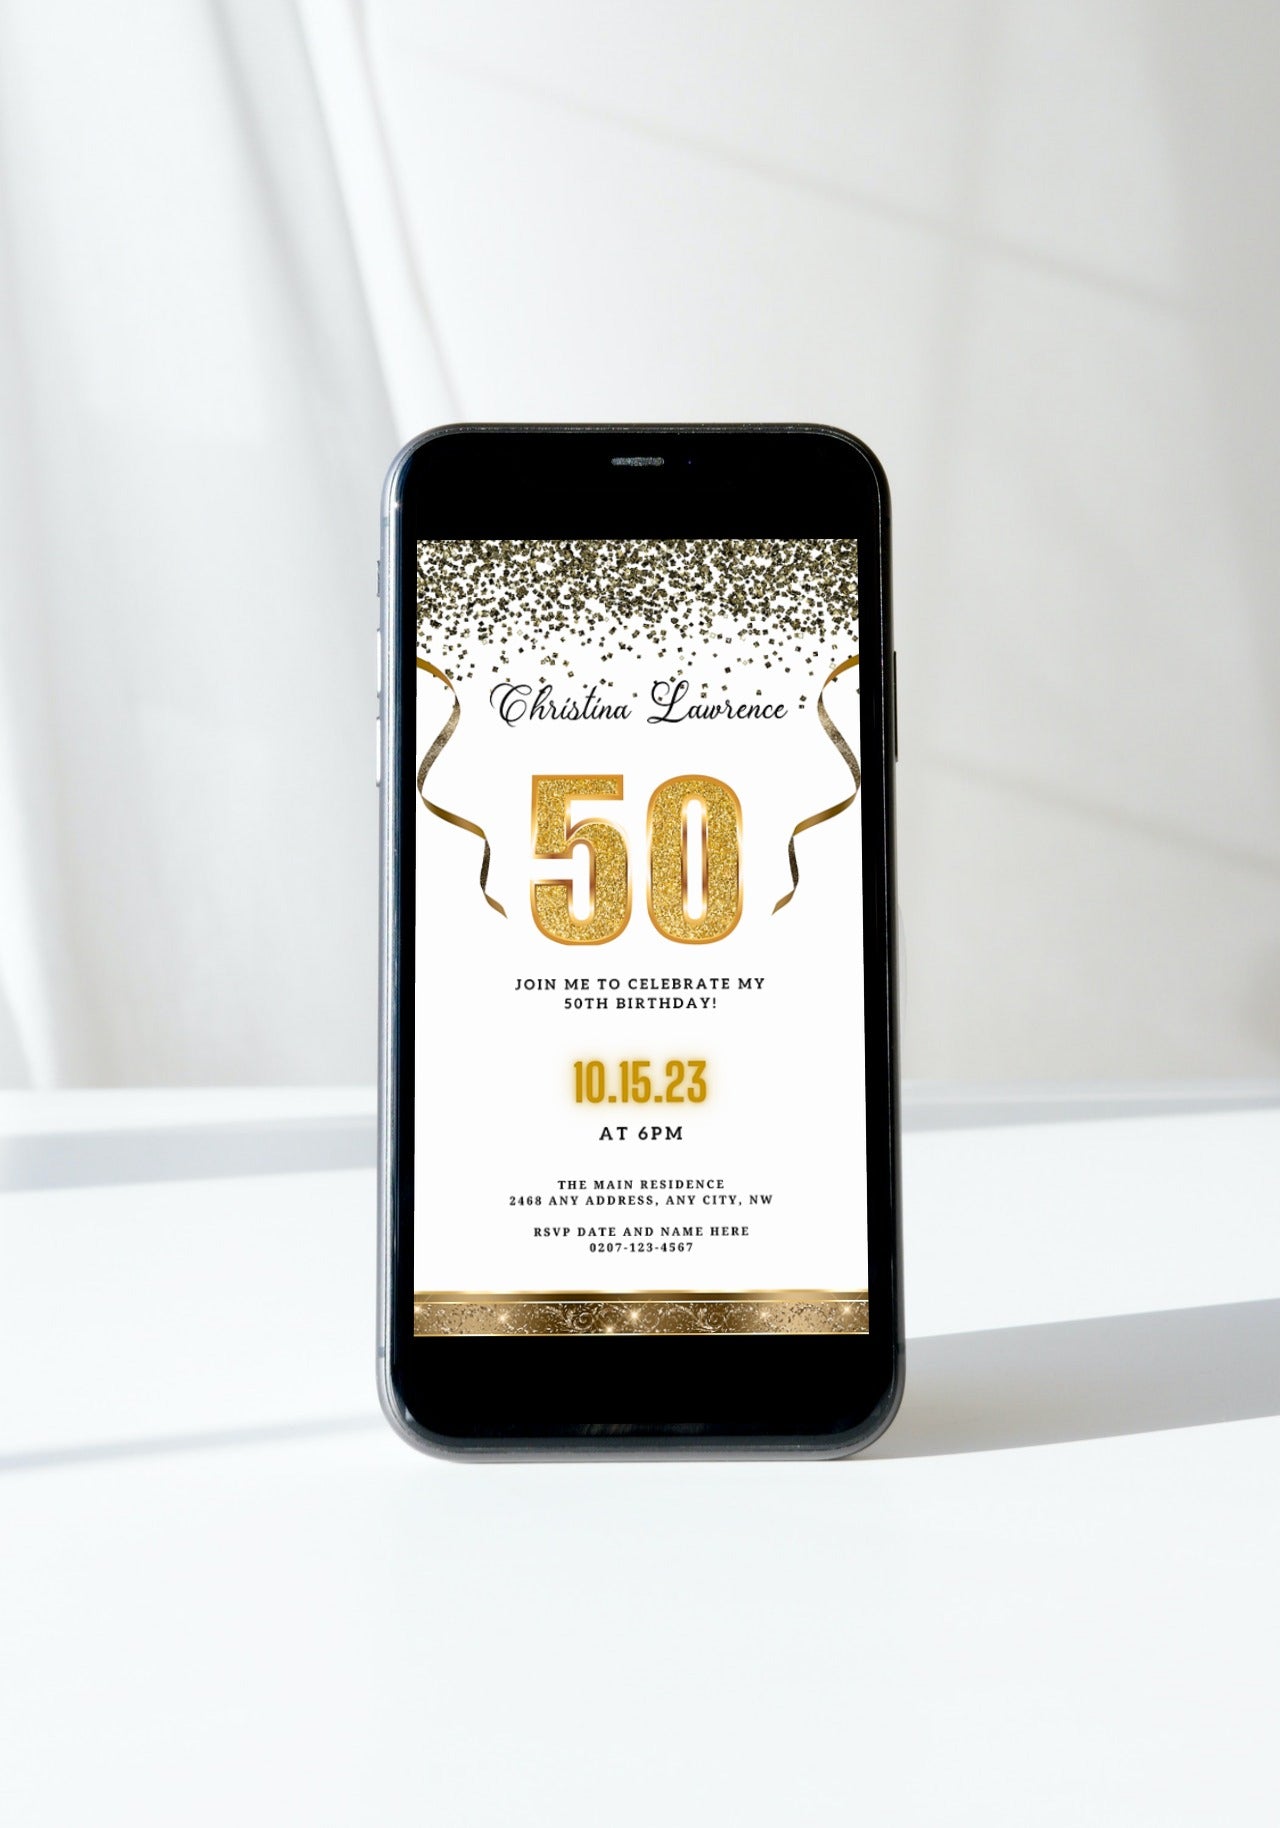 White Gold Confetti | 50th Birthday Evite displayed on a smartphone screen, featuring gold text and decorative ribbons.